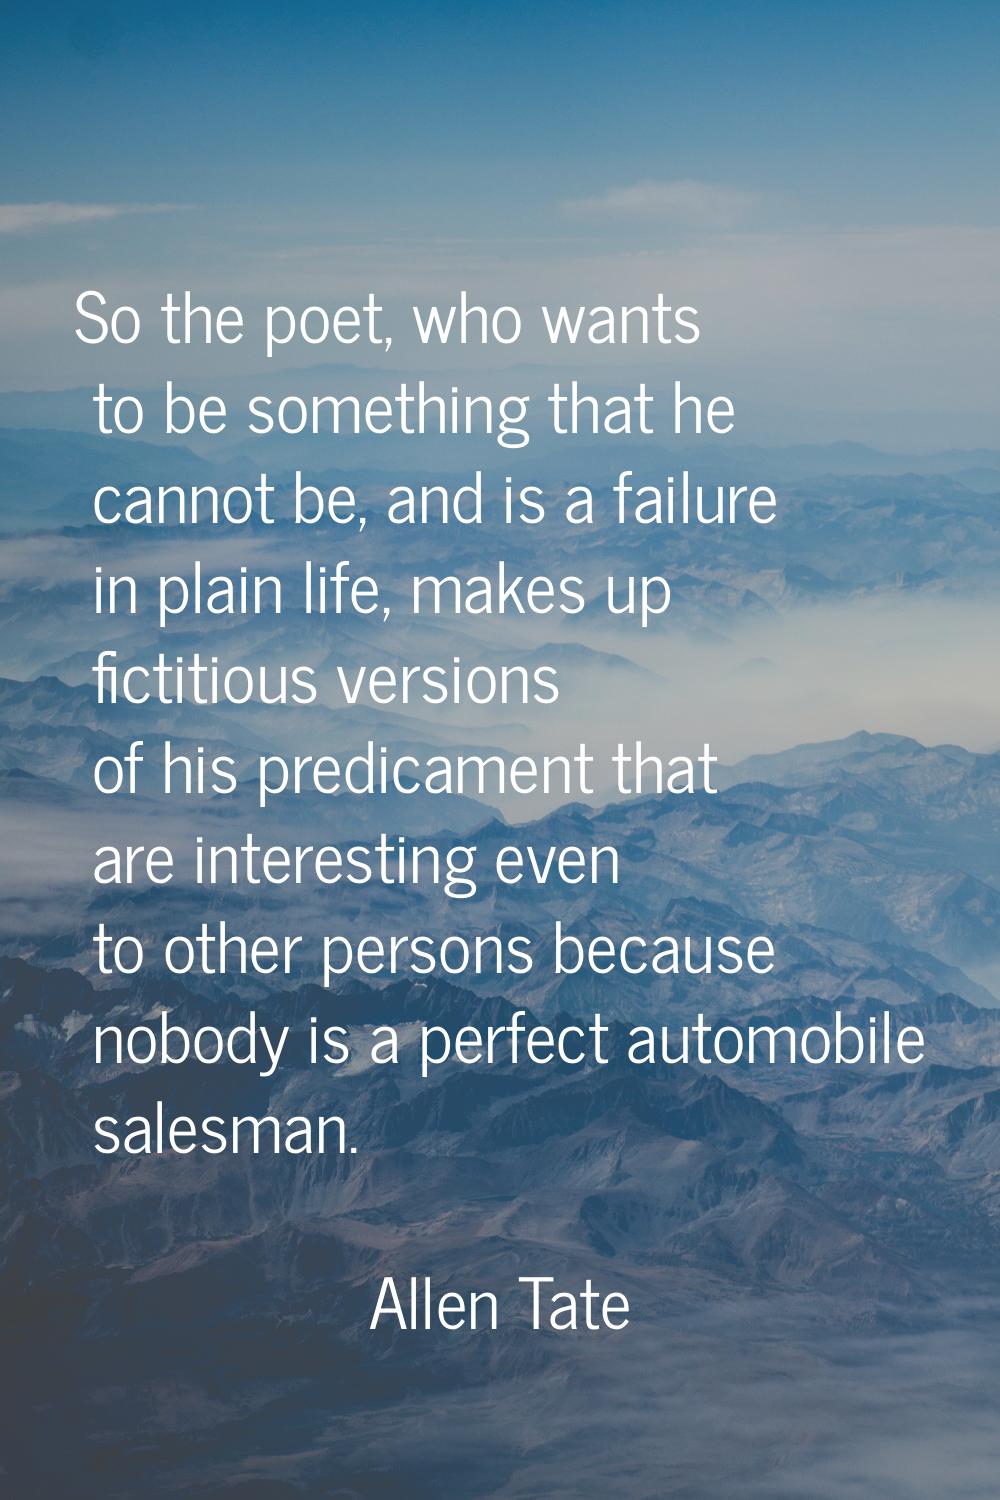 So the poet, who wants to be something that he cannot be, and is a failure in plain life, makes up 